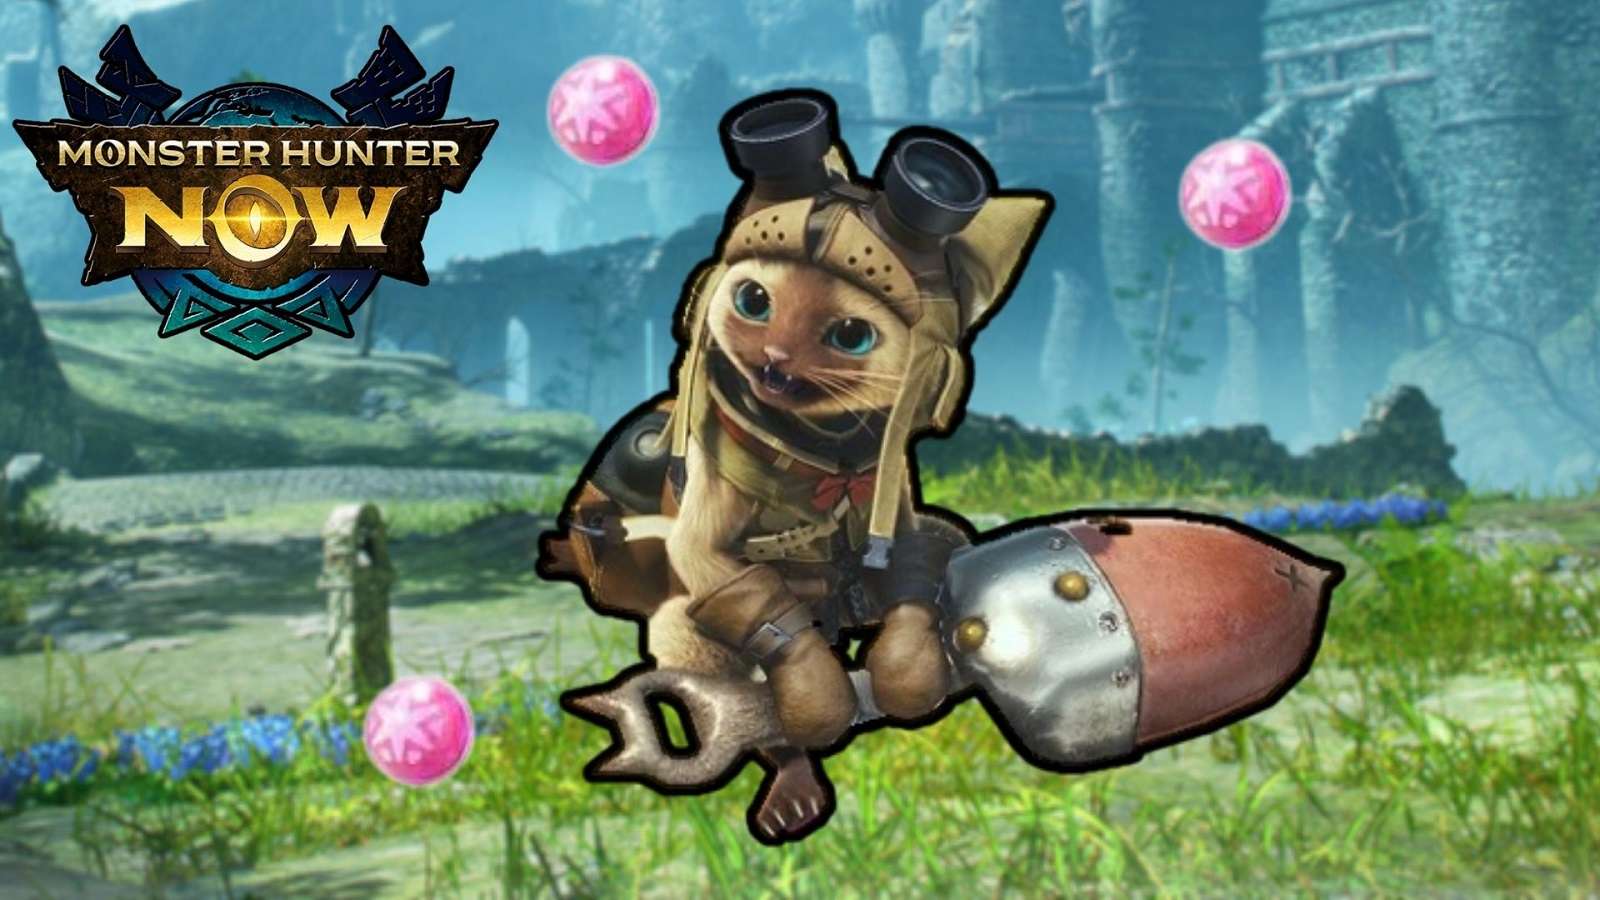 Palico sitting on grass with Paintballs